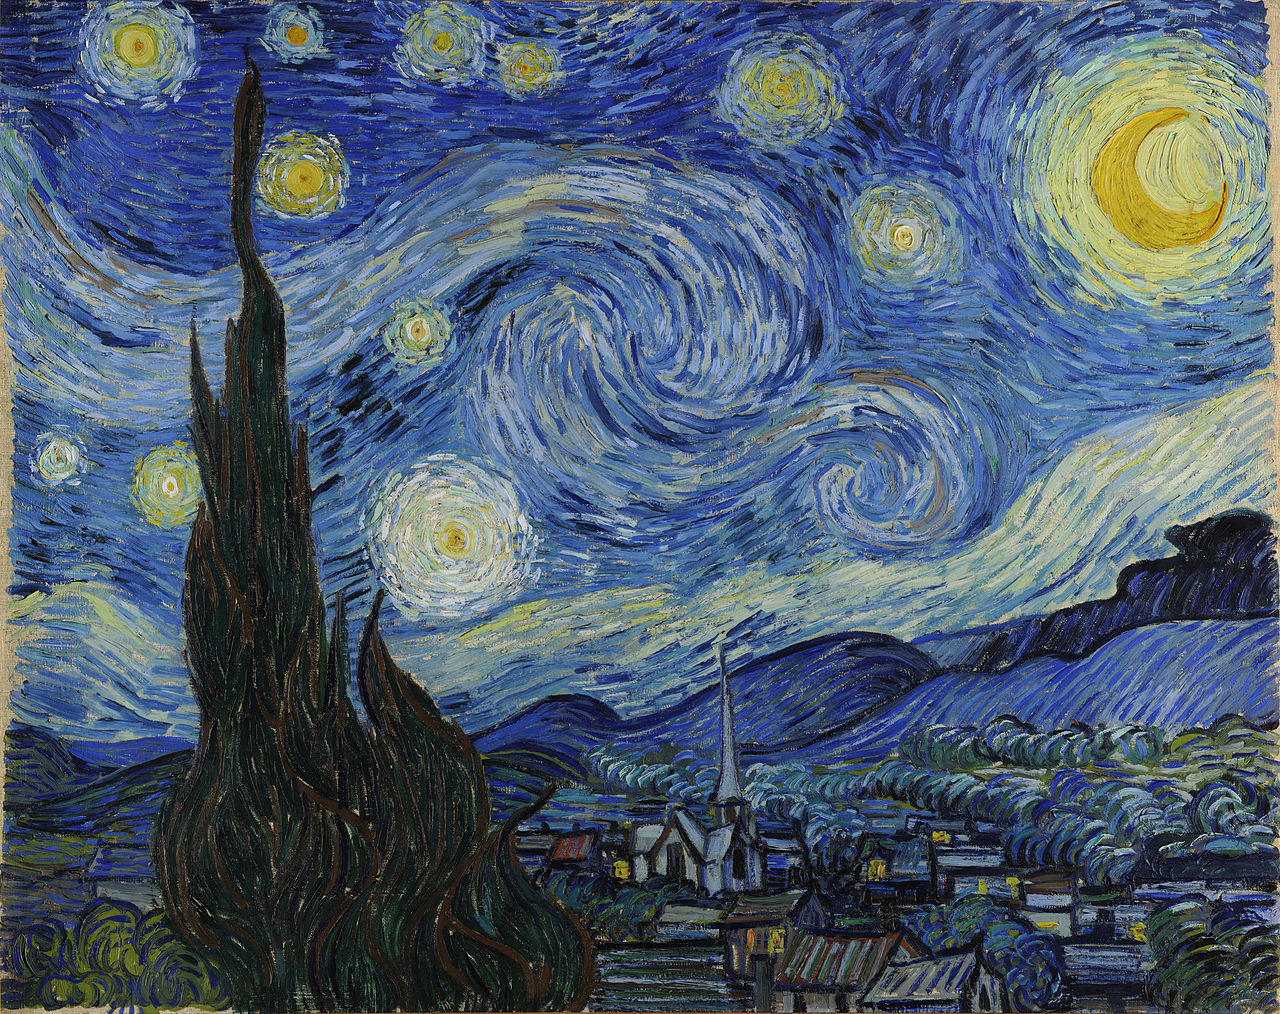 "Starry Night" By Vincent Van Gogh Source: Wikipedia